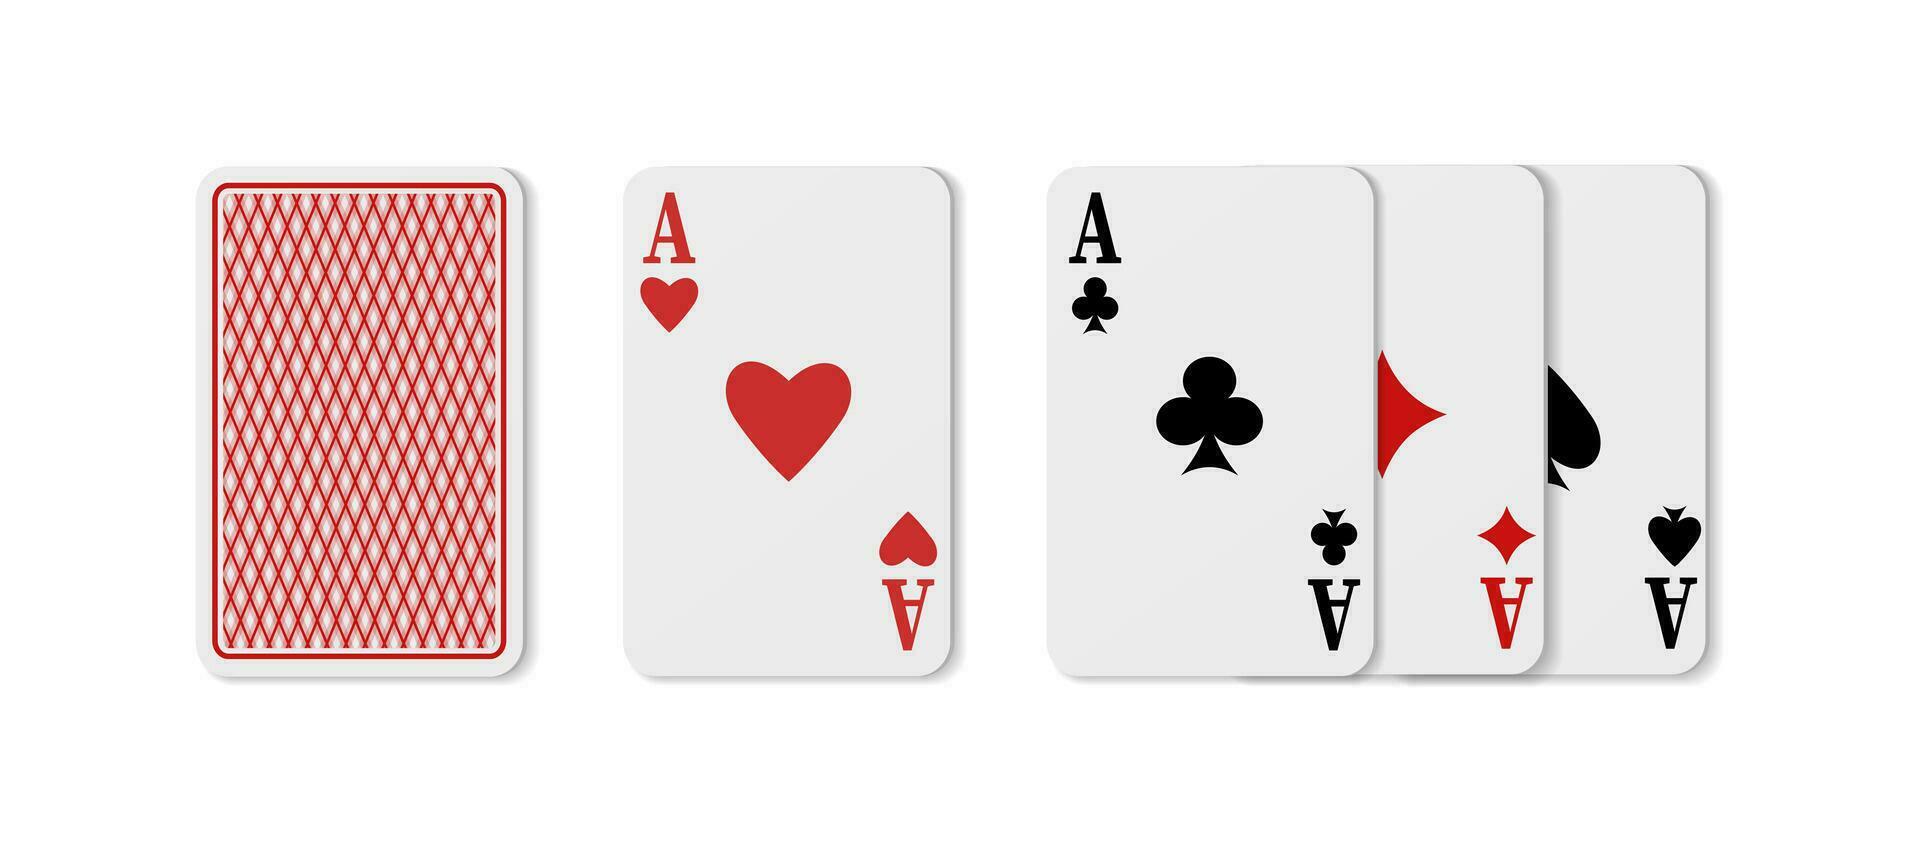 3d realistic vector icon set of ace playing cards. isolated on white background.